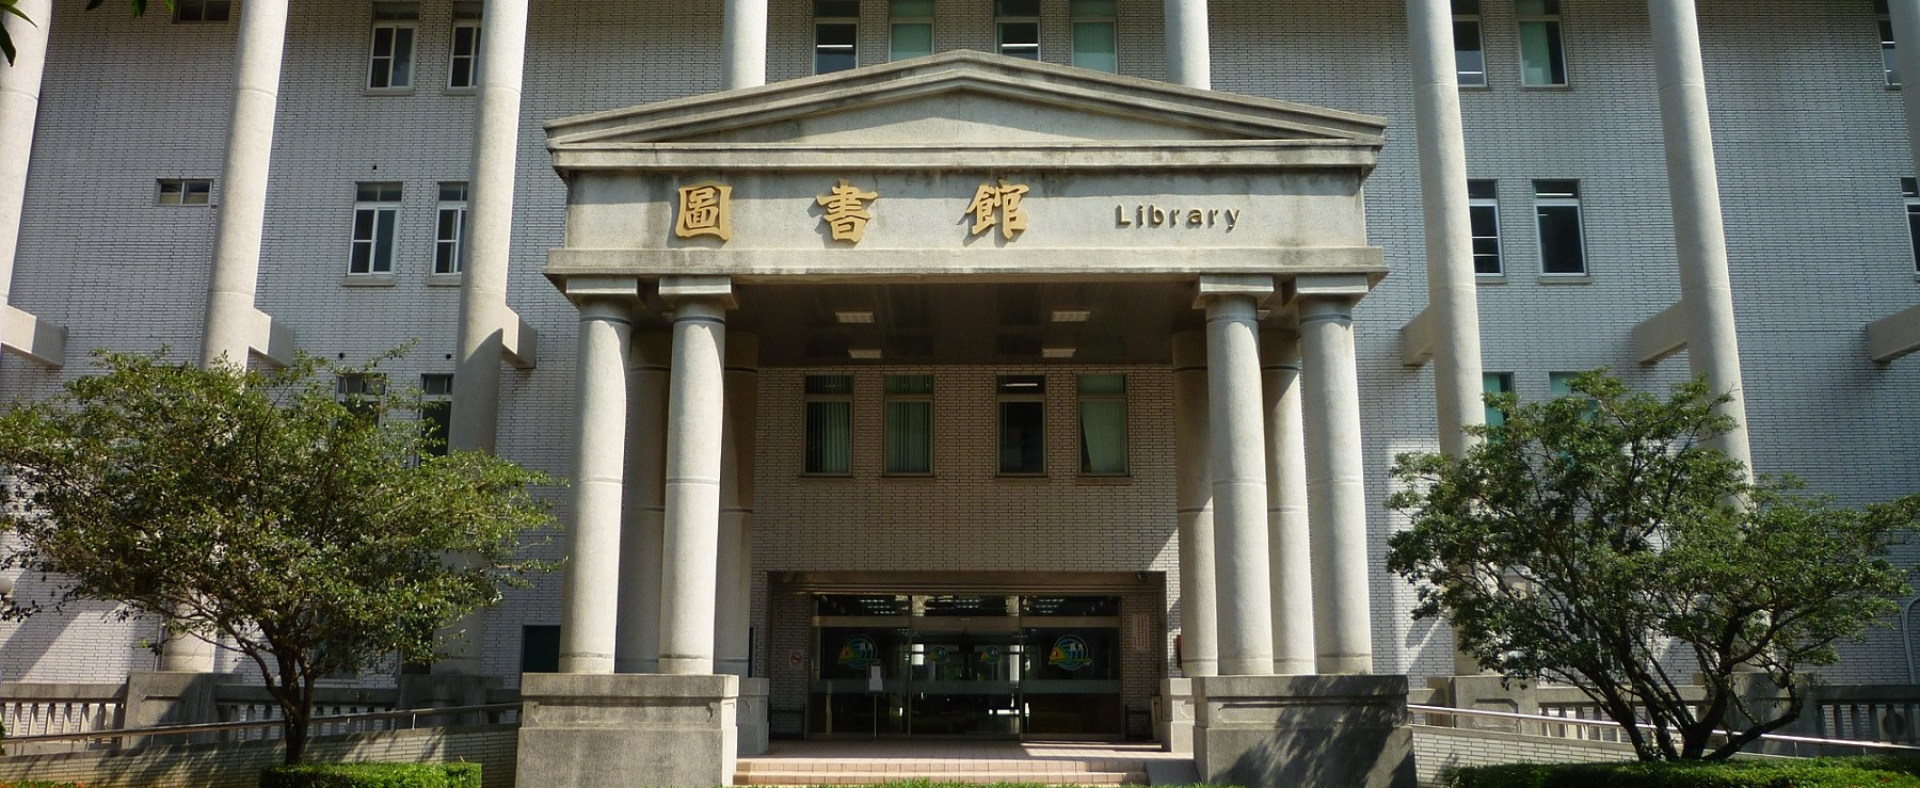 MingHsiung Library